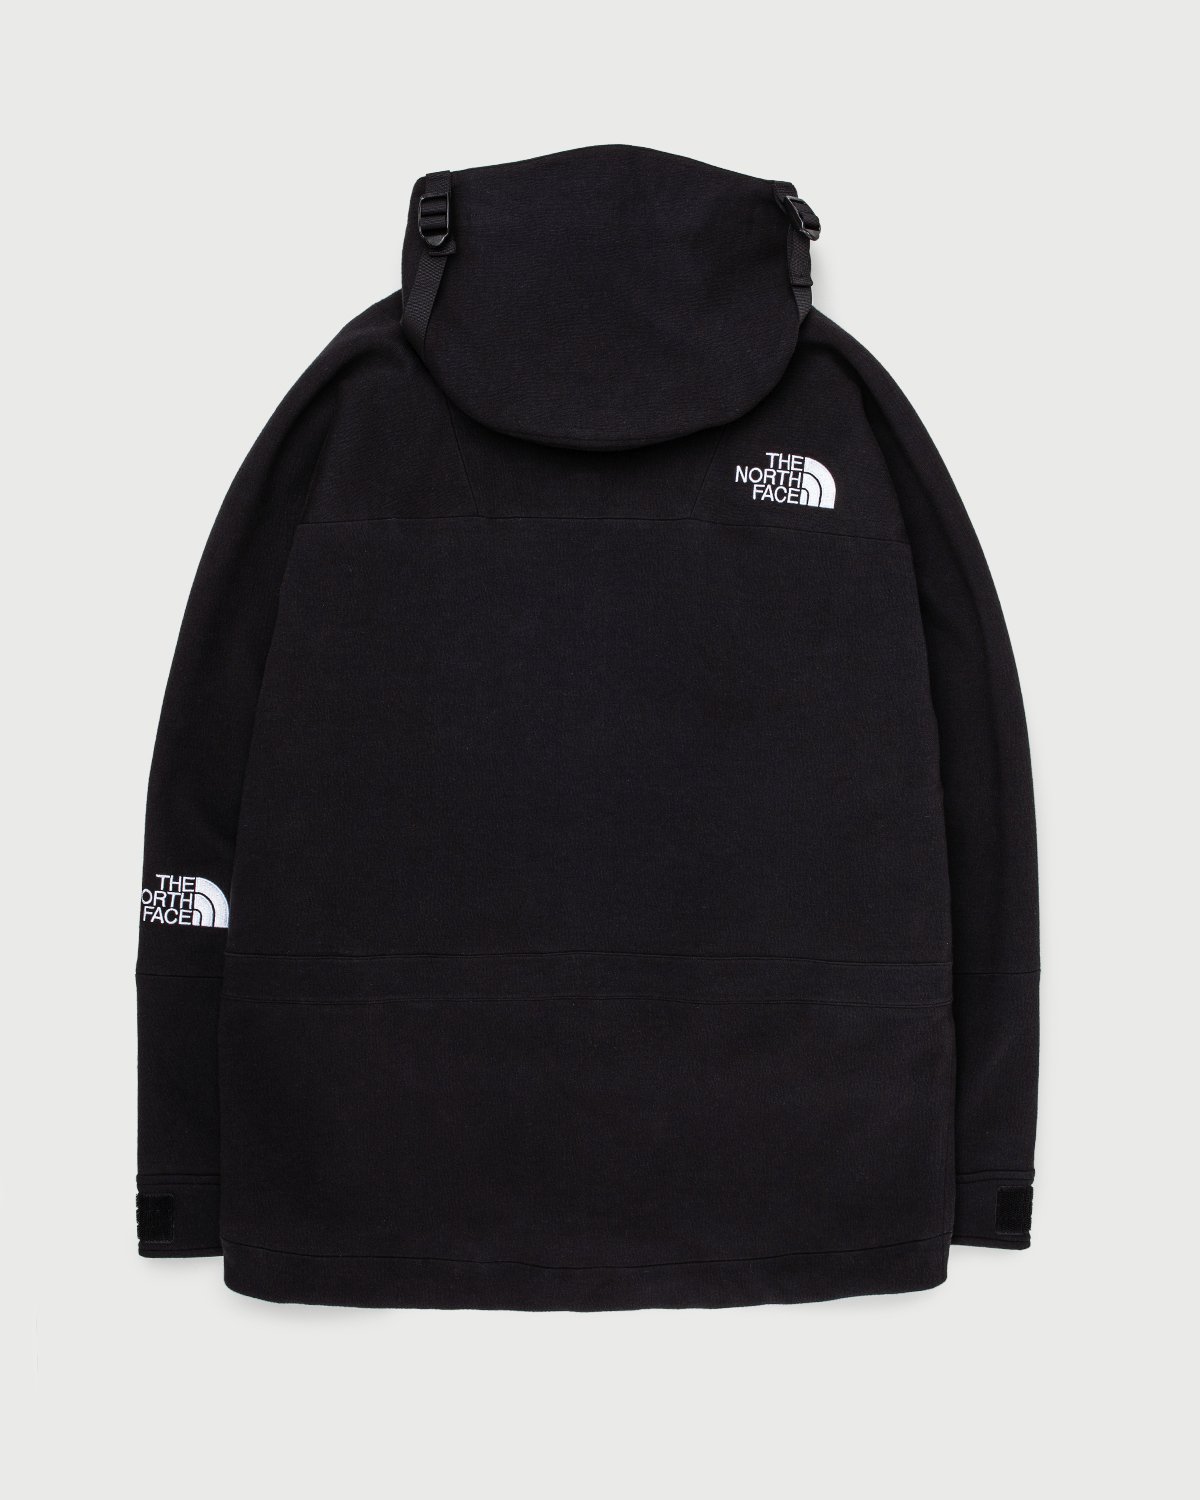 The North Face - Black Series Spacer Knit Mountain Light Jacket Black - Clothing - Black - Image 3